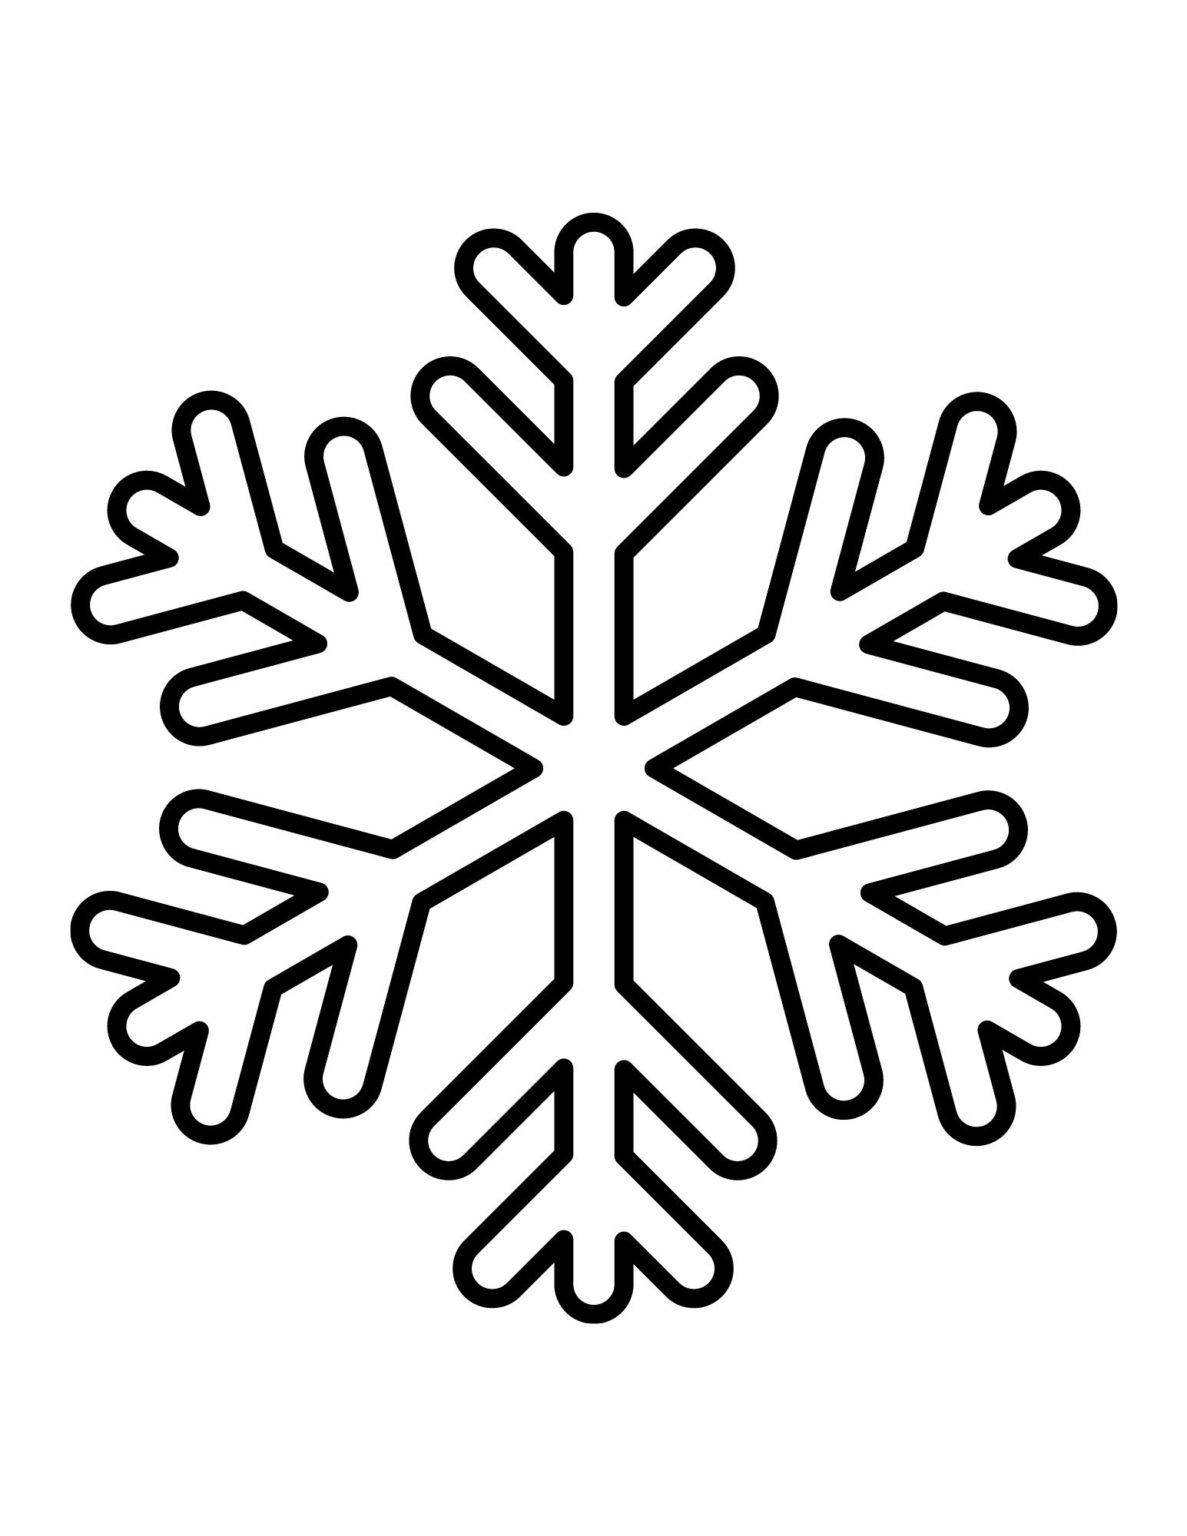 free-printable-snowflake-patterns-large-and-small-snowflakes